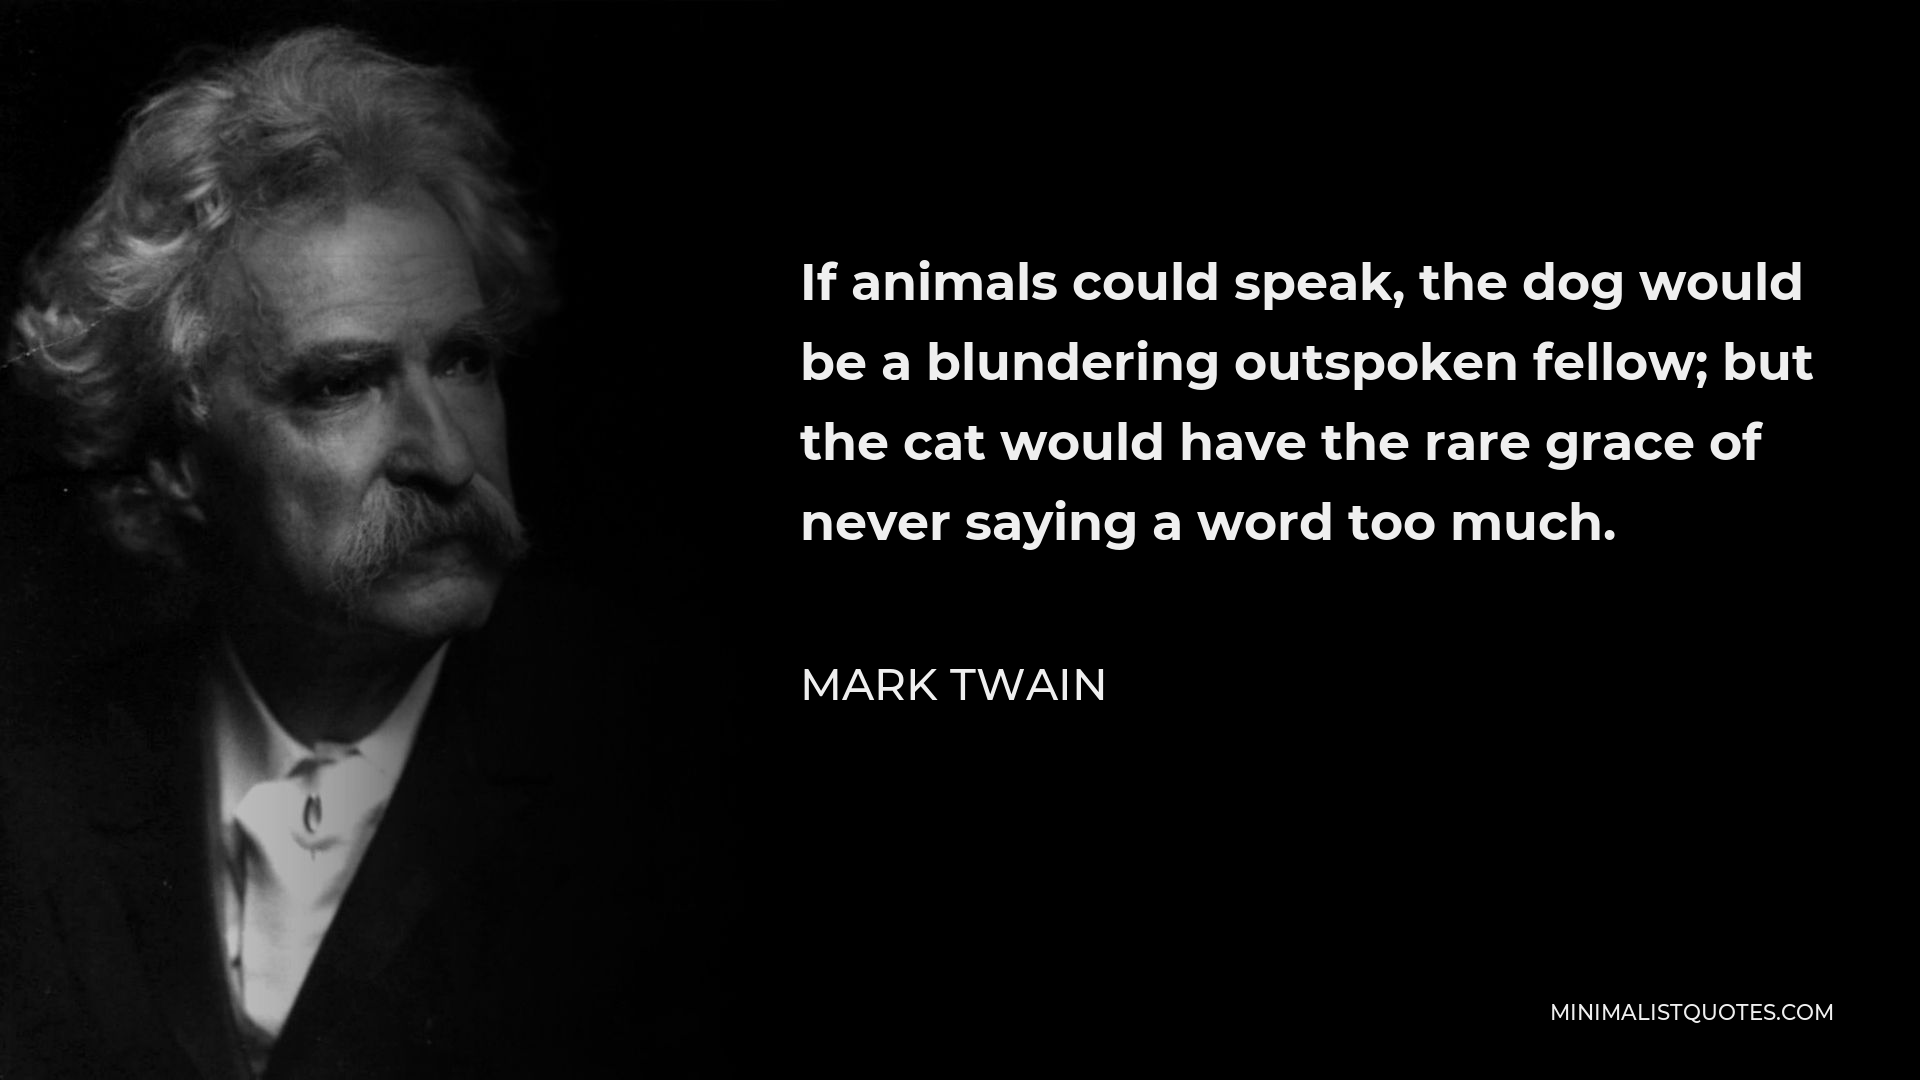 Mark Twain Quote - If animals could speak, the dog would be a blundering outspoken fellow; but the cat would have the rare grace of never saying a word too much.